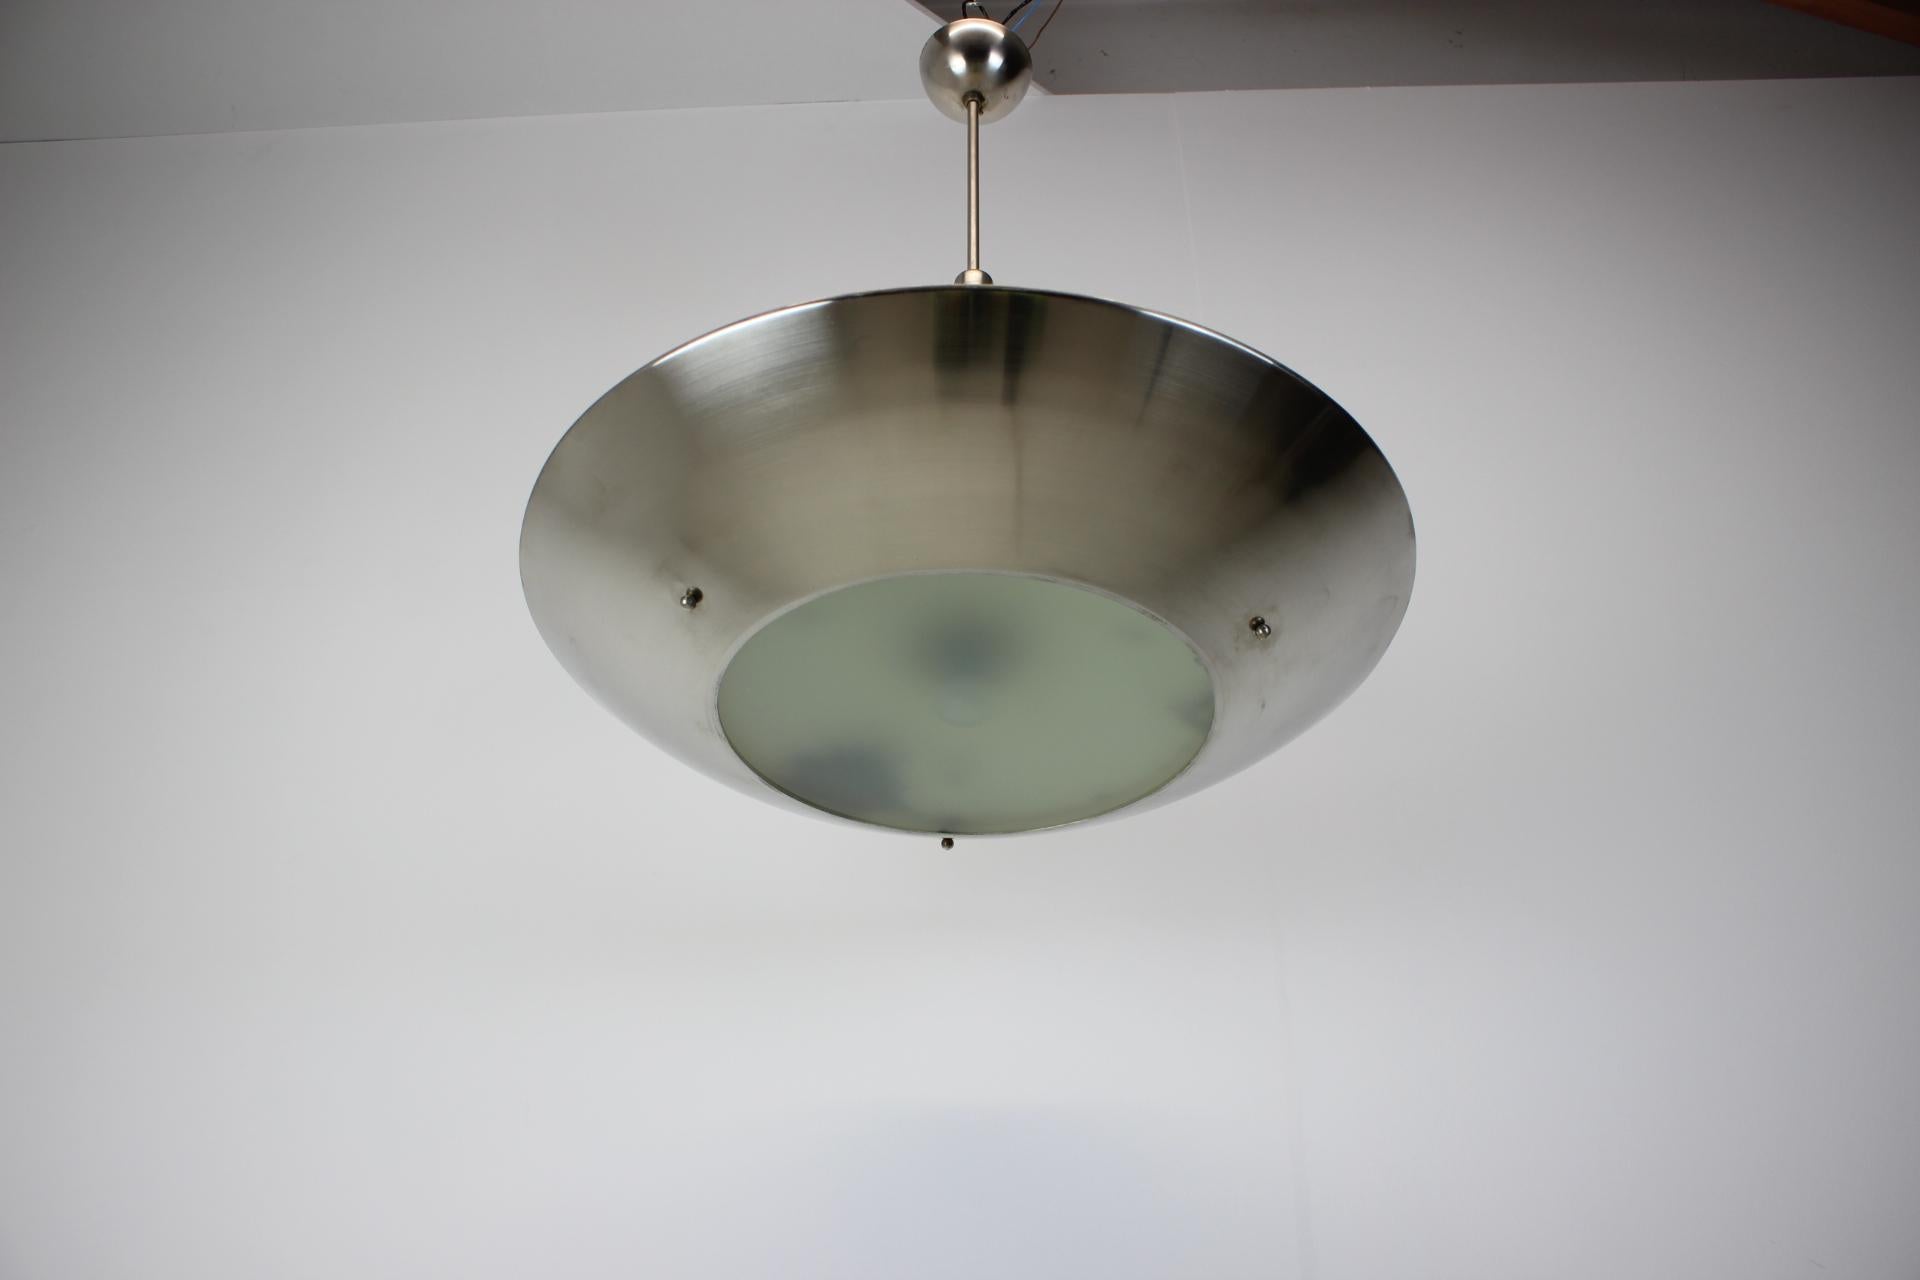 Art deco chrome pendant light by famous designer Franta Anýž. Produced in former Czechoslovakia in the 1930's. Bulbs: 4x E25-E27. US wiring compatible.